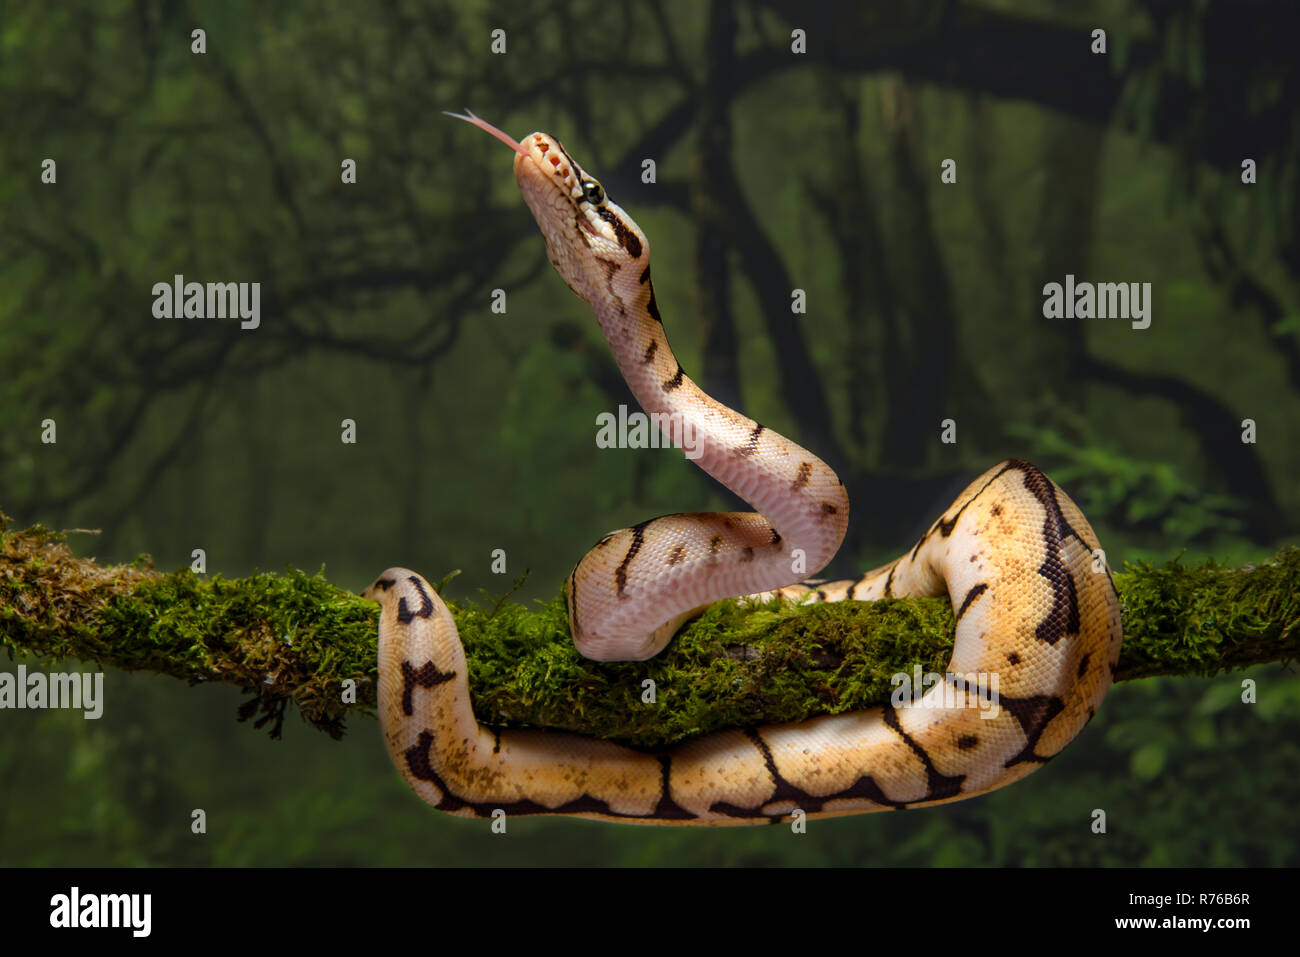 A close up of a baby bumble bee royal python. It is coiled around a tree branch with its head up and tongue out Stock Photo